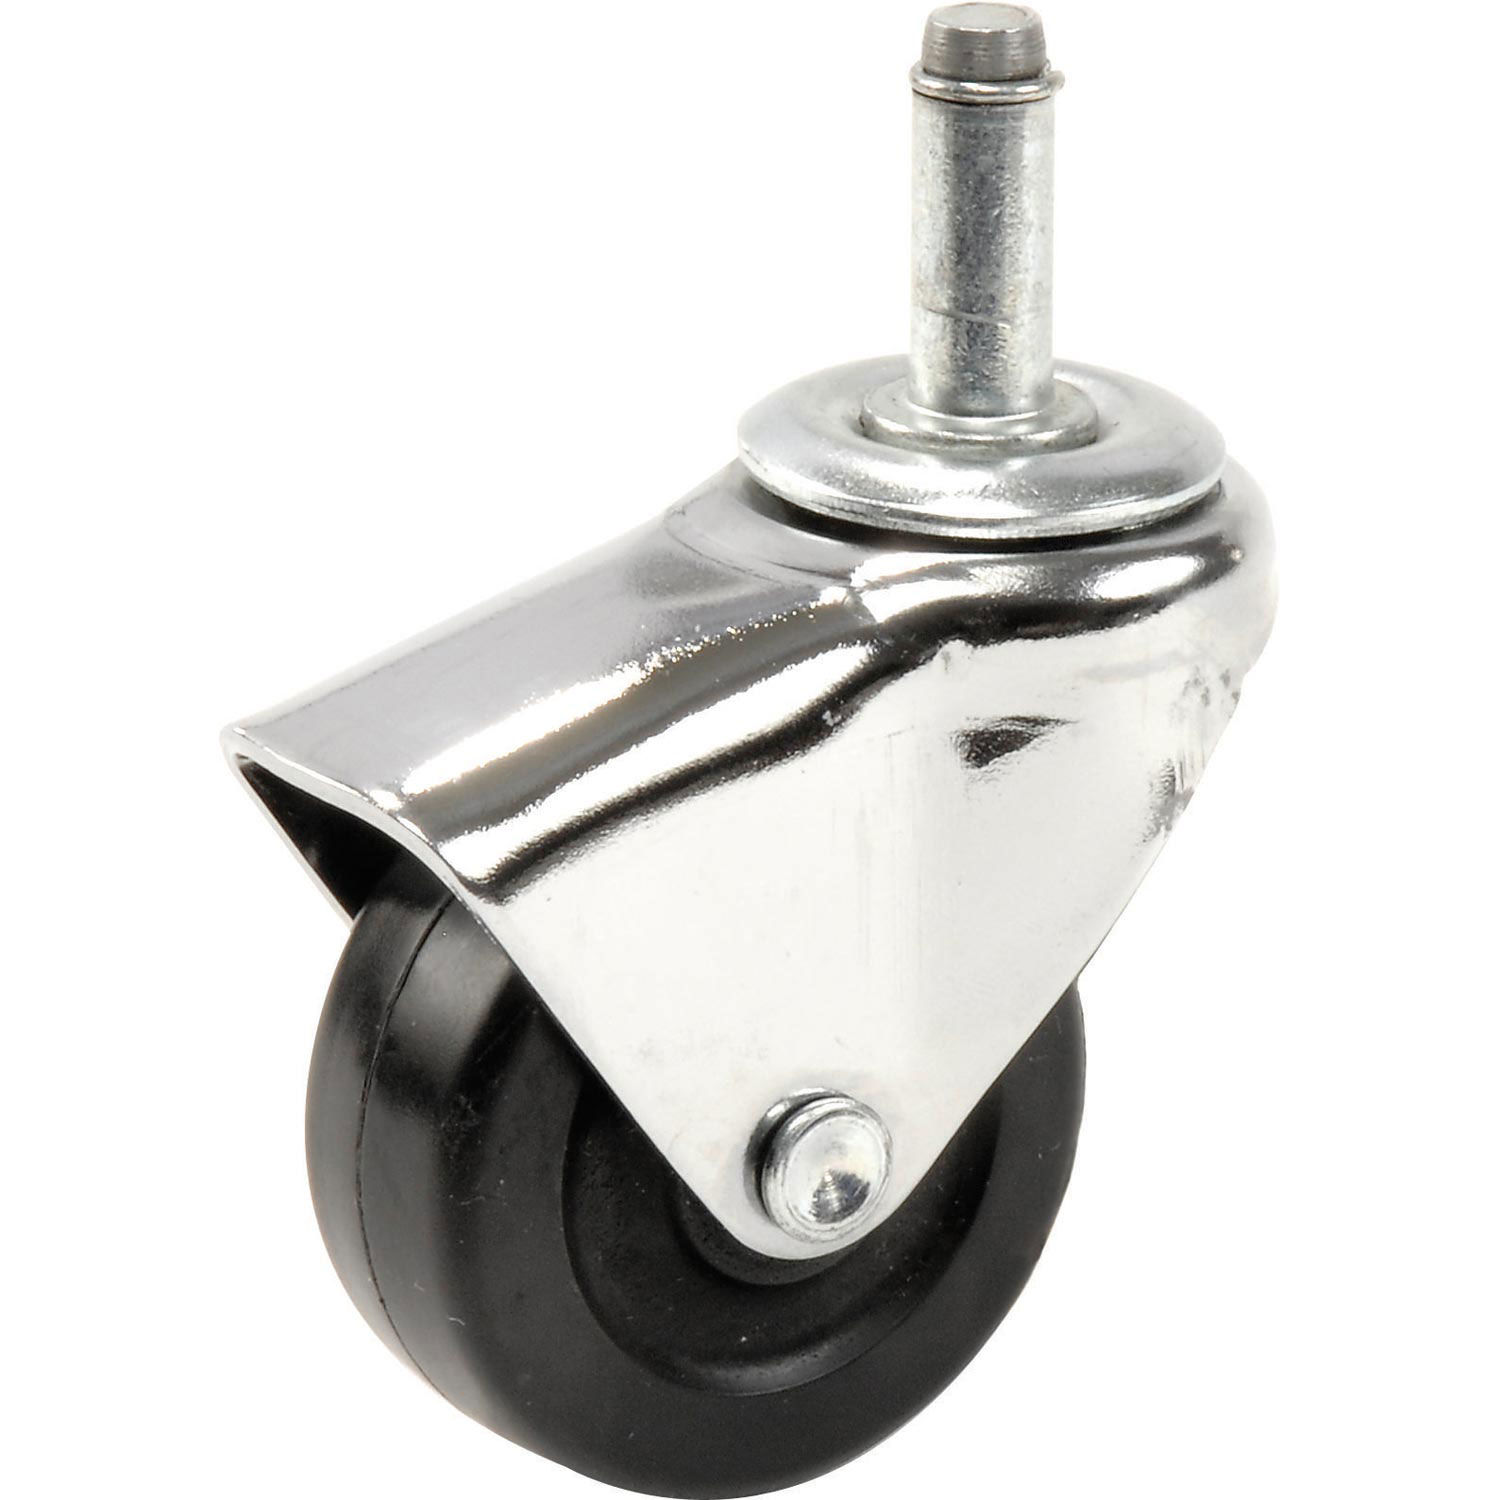 Algood Deluxe Series Chair Caster with Hard Rubber Wheel, 5/16-UT-BB